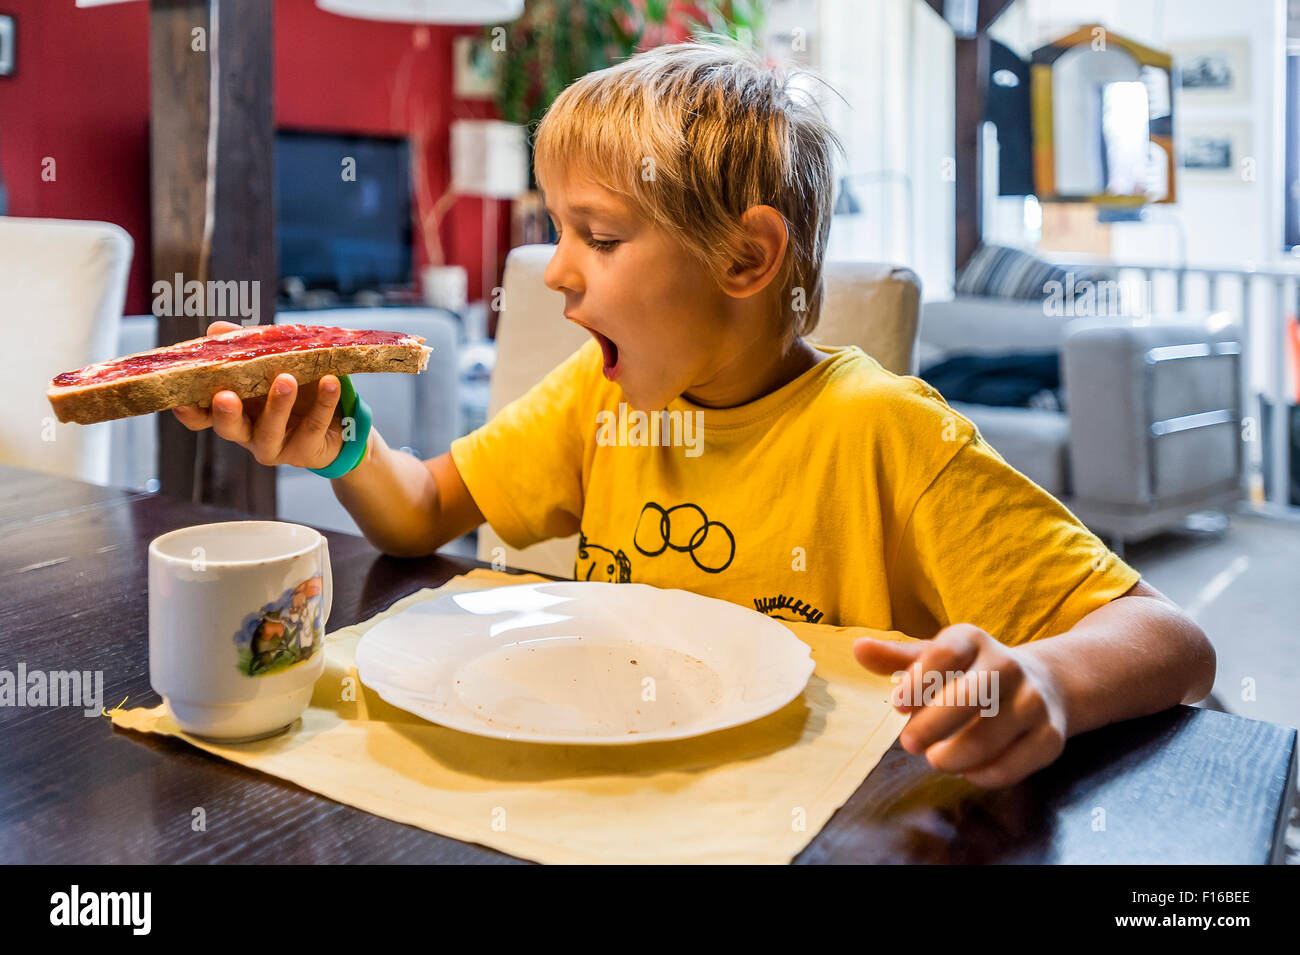 blond boy in yellow jersey eating at the table bread and jam Stock Photo